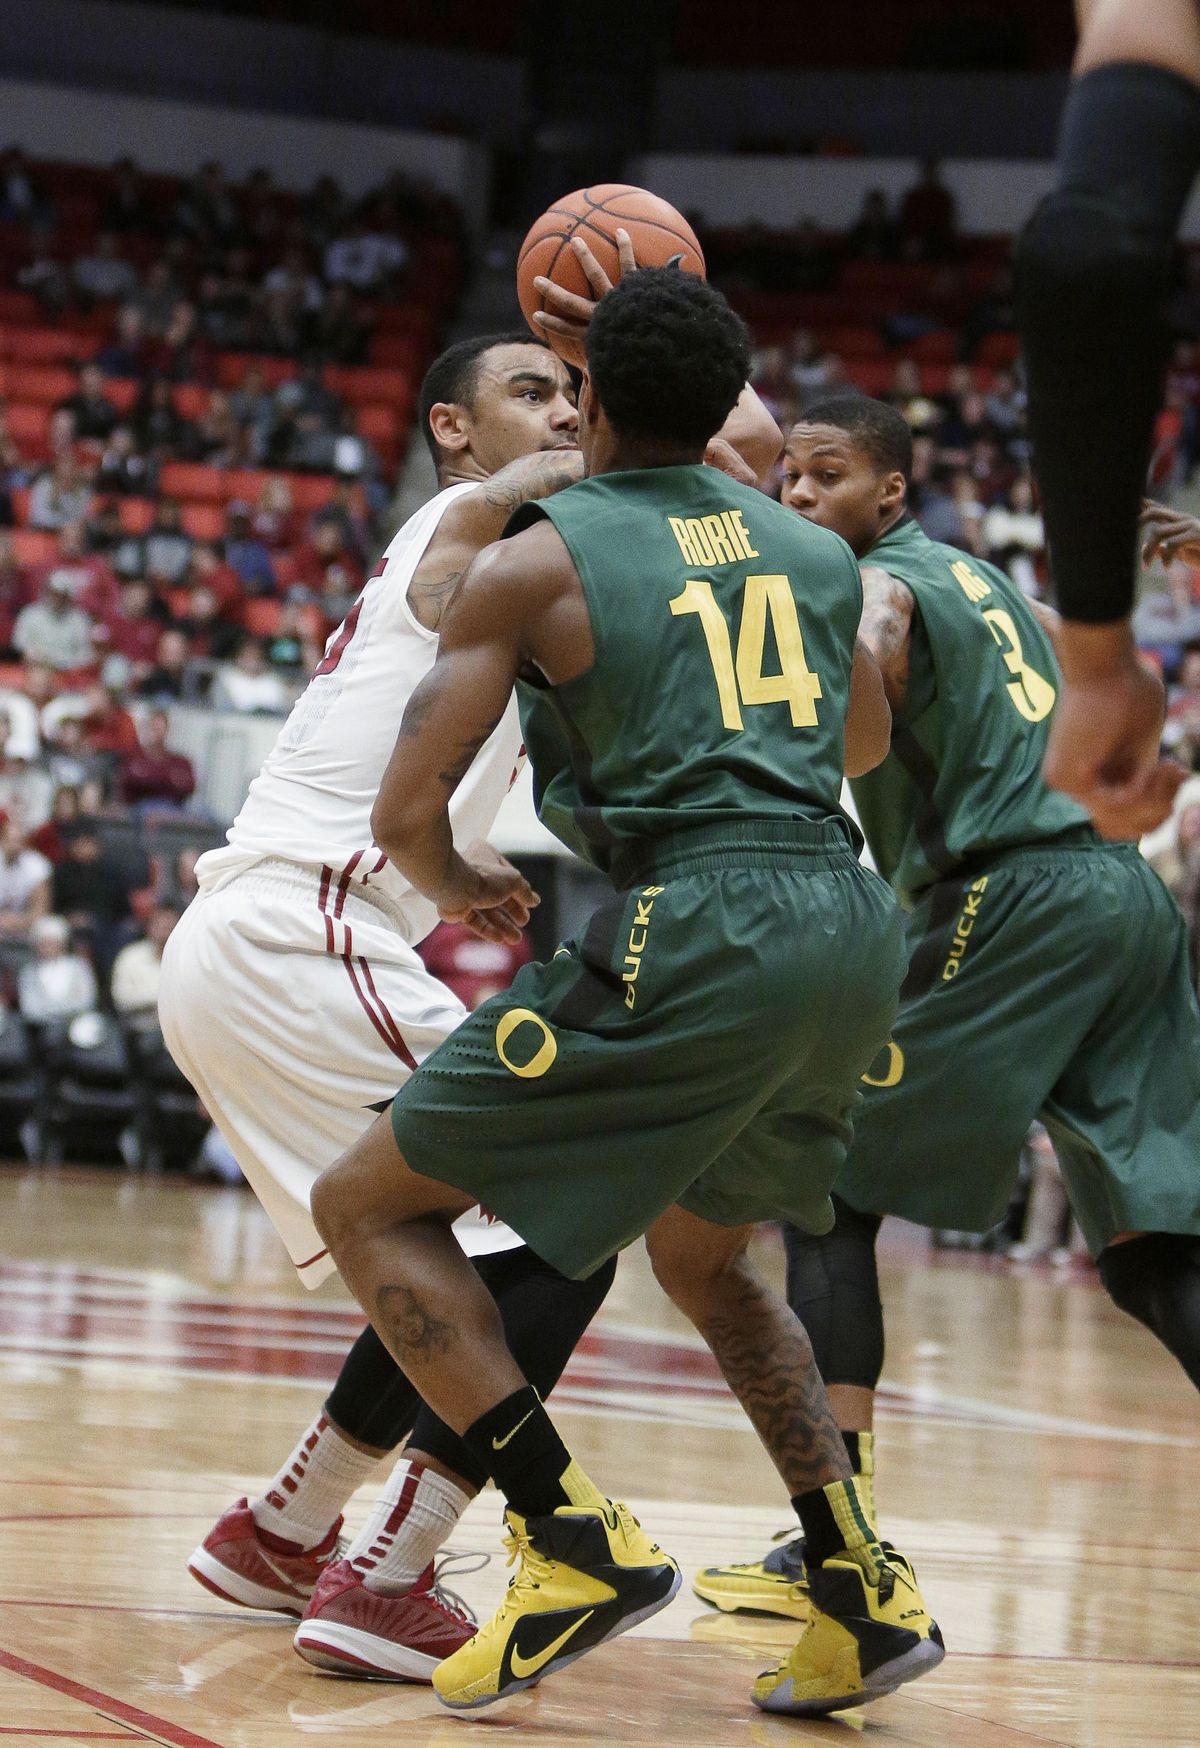 Washington State’s DaVonte Lacy scored 24 points as the Cougars beat the Ducks and moved to 3-1 in Pac-12 play this season. (Associated Press)